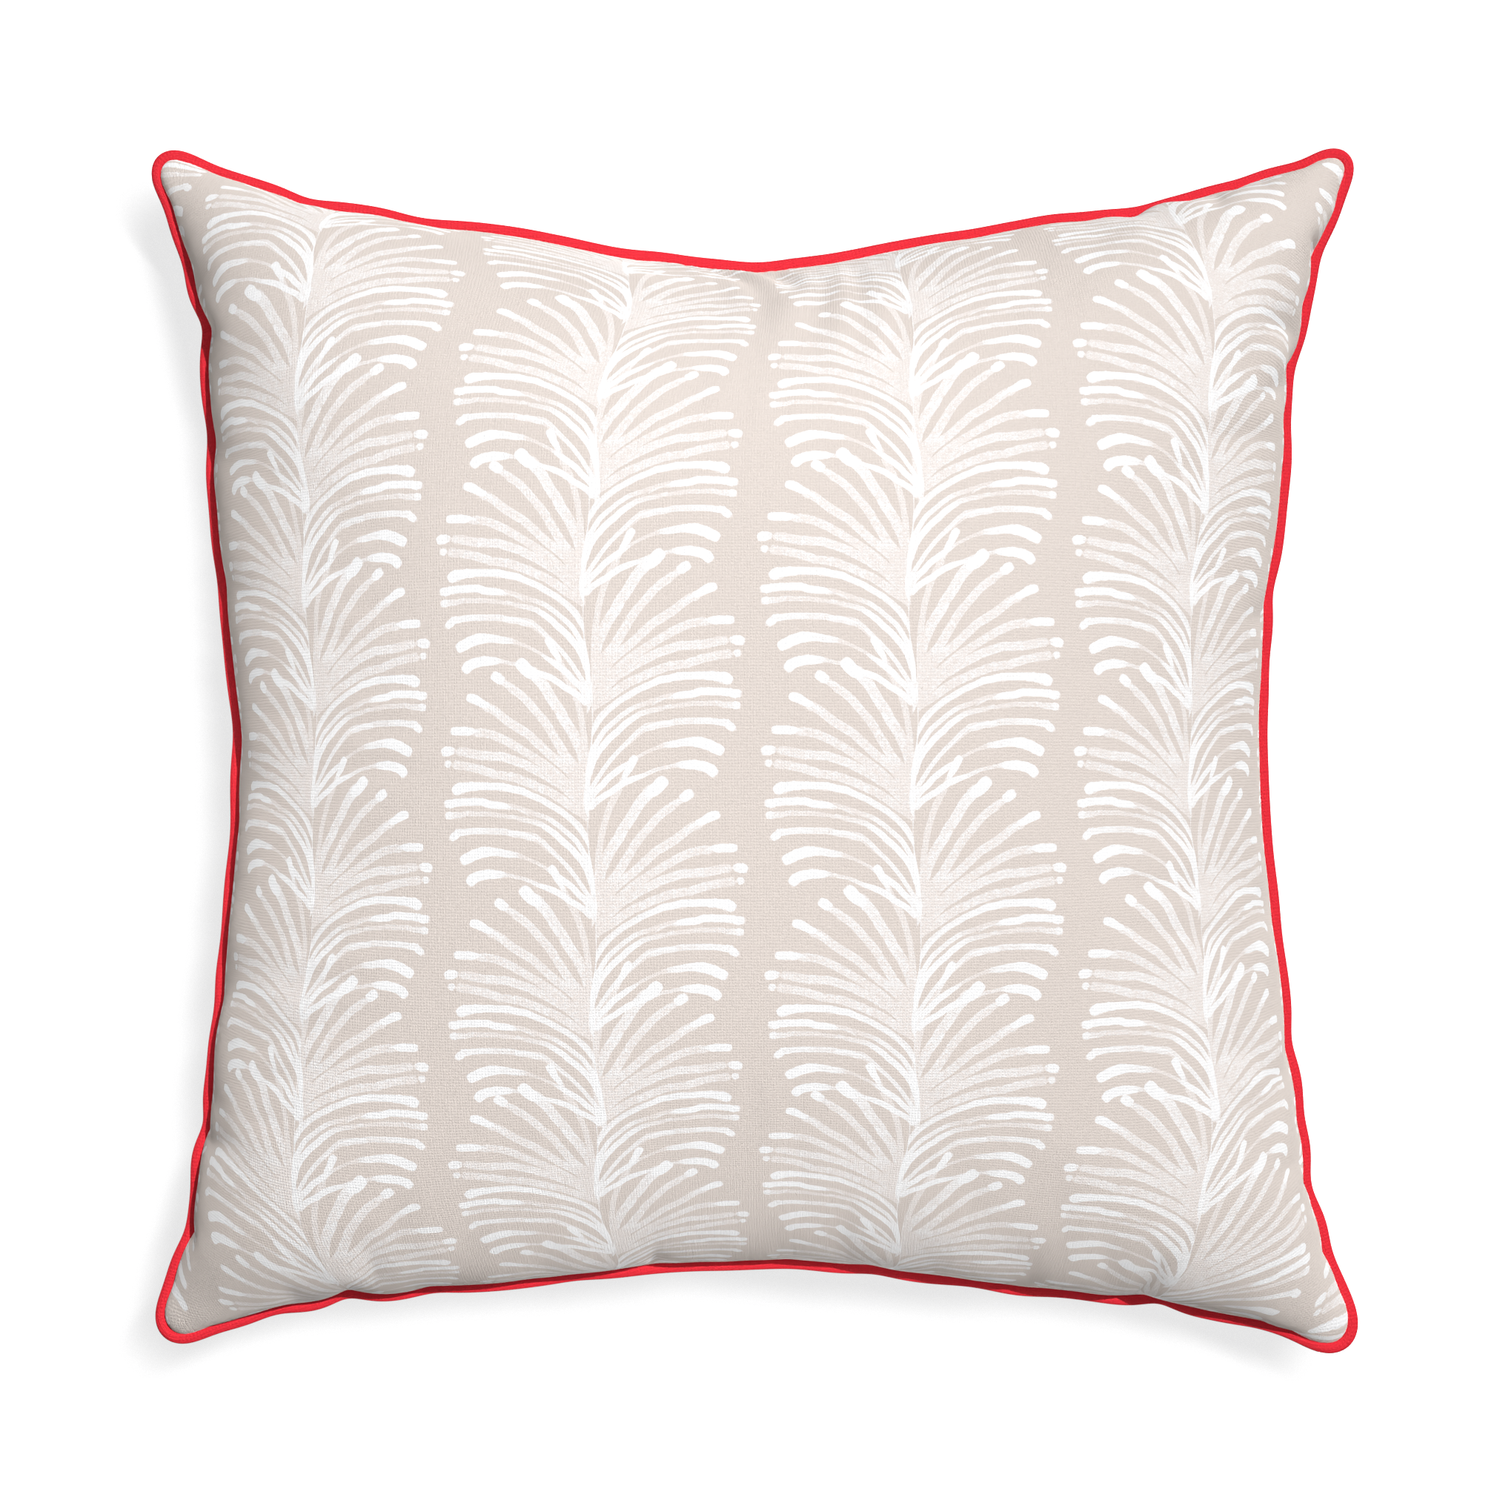 Euro-sham emma sand custom sand colored botanical stripepillow with cherry piping on white background